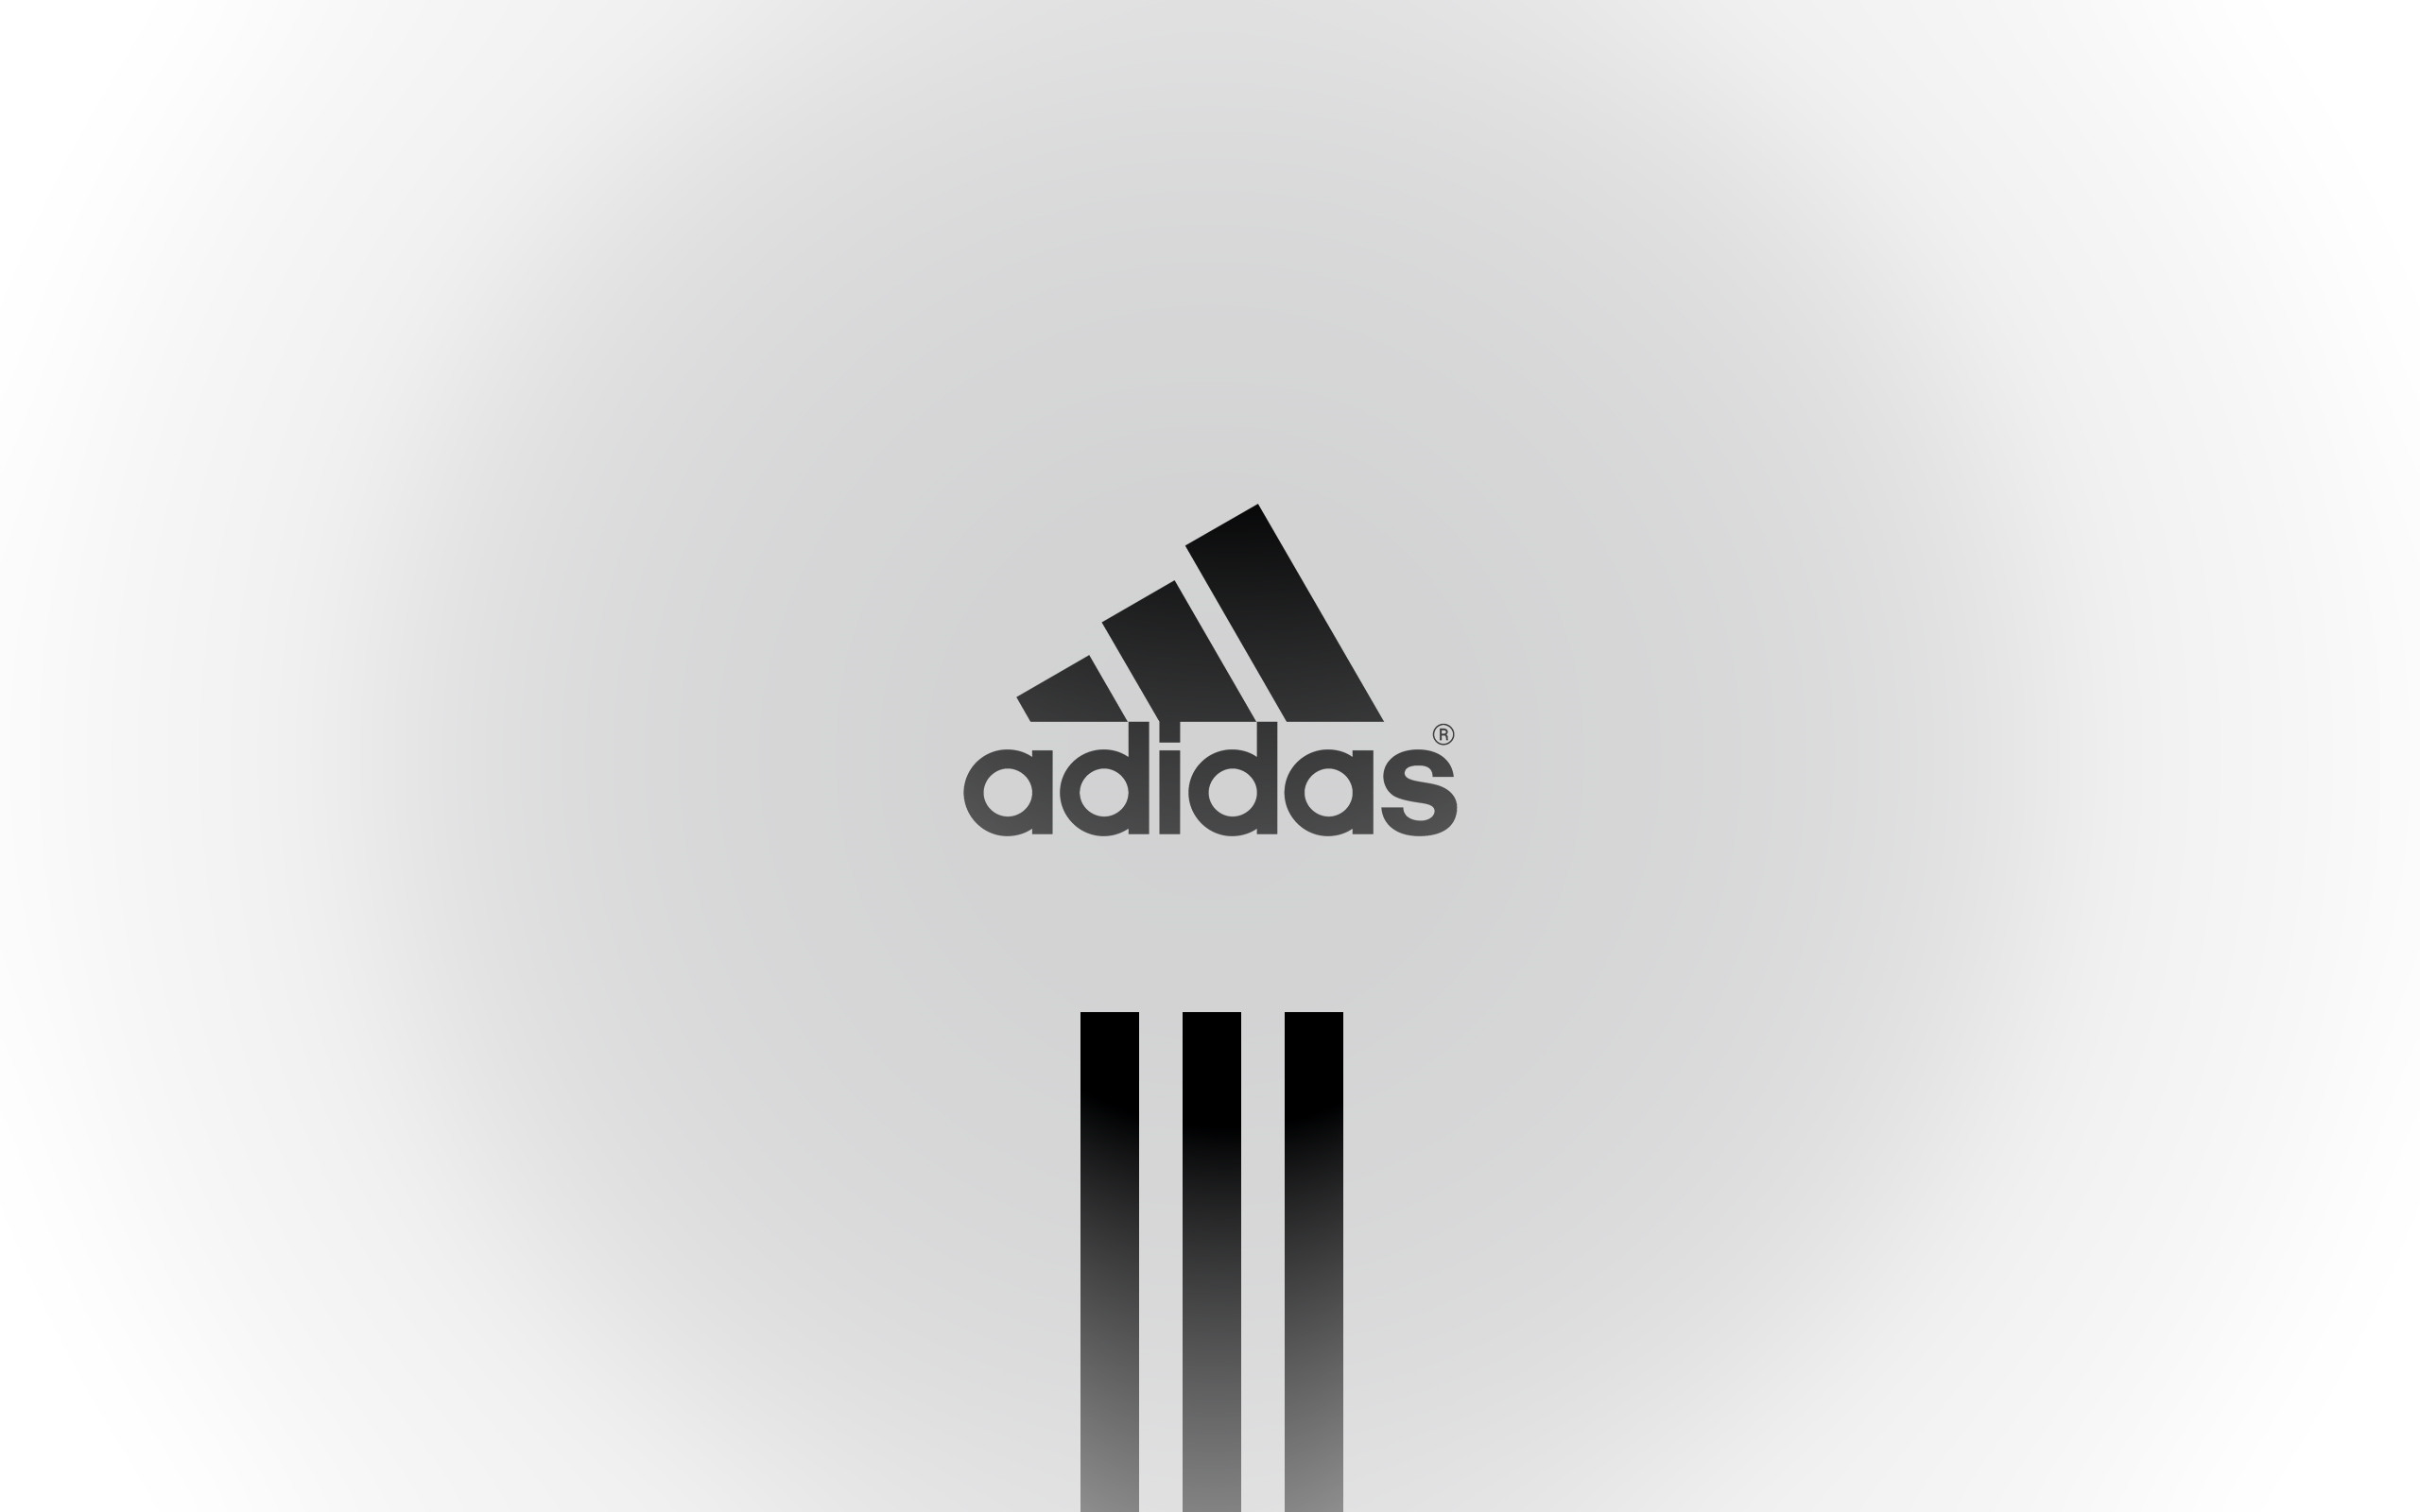 2560x1600 Adidas logo Simple wallpapers HD 13 Backgrounds wfz